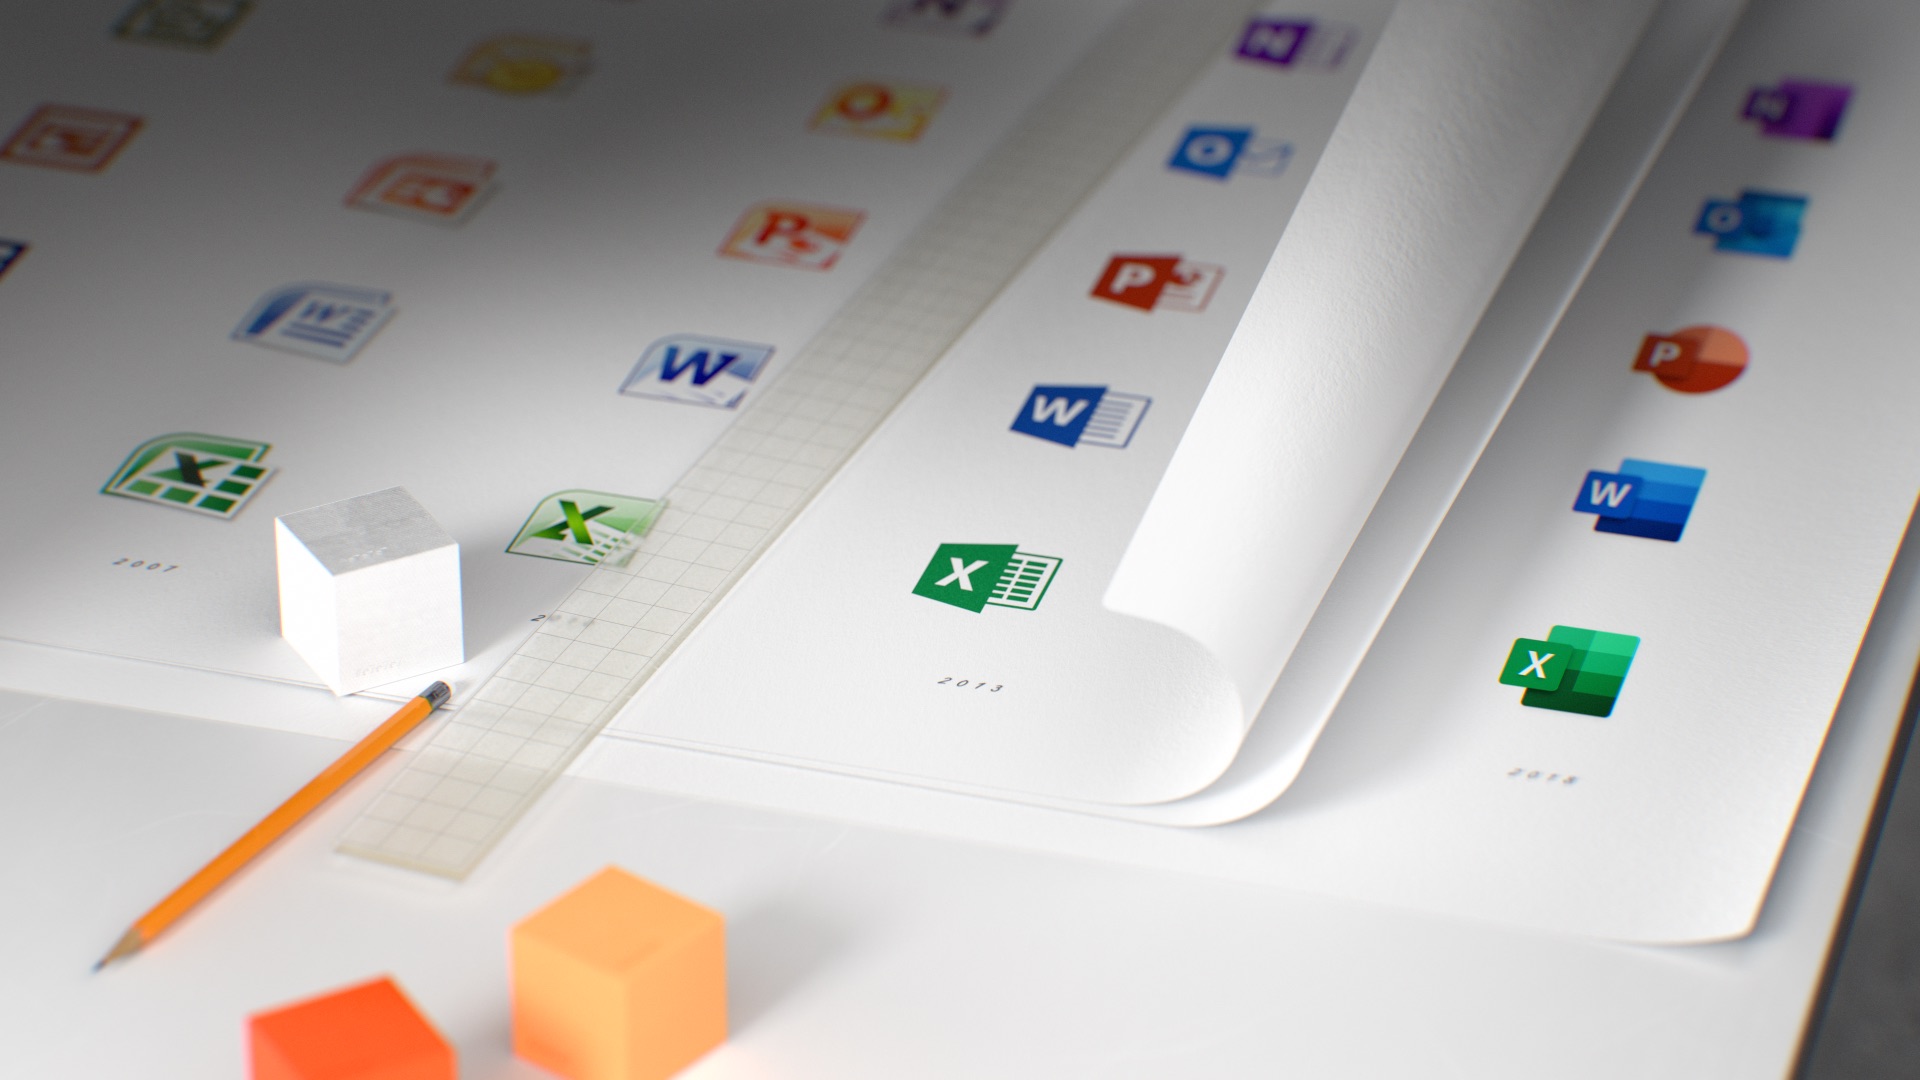 microsoft office for mac new icons